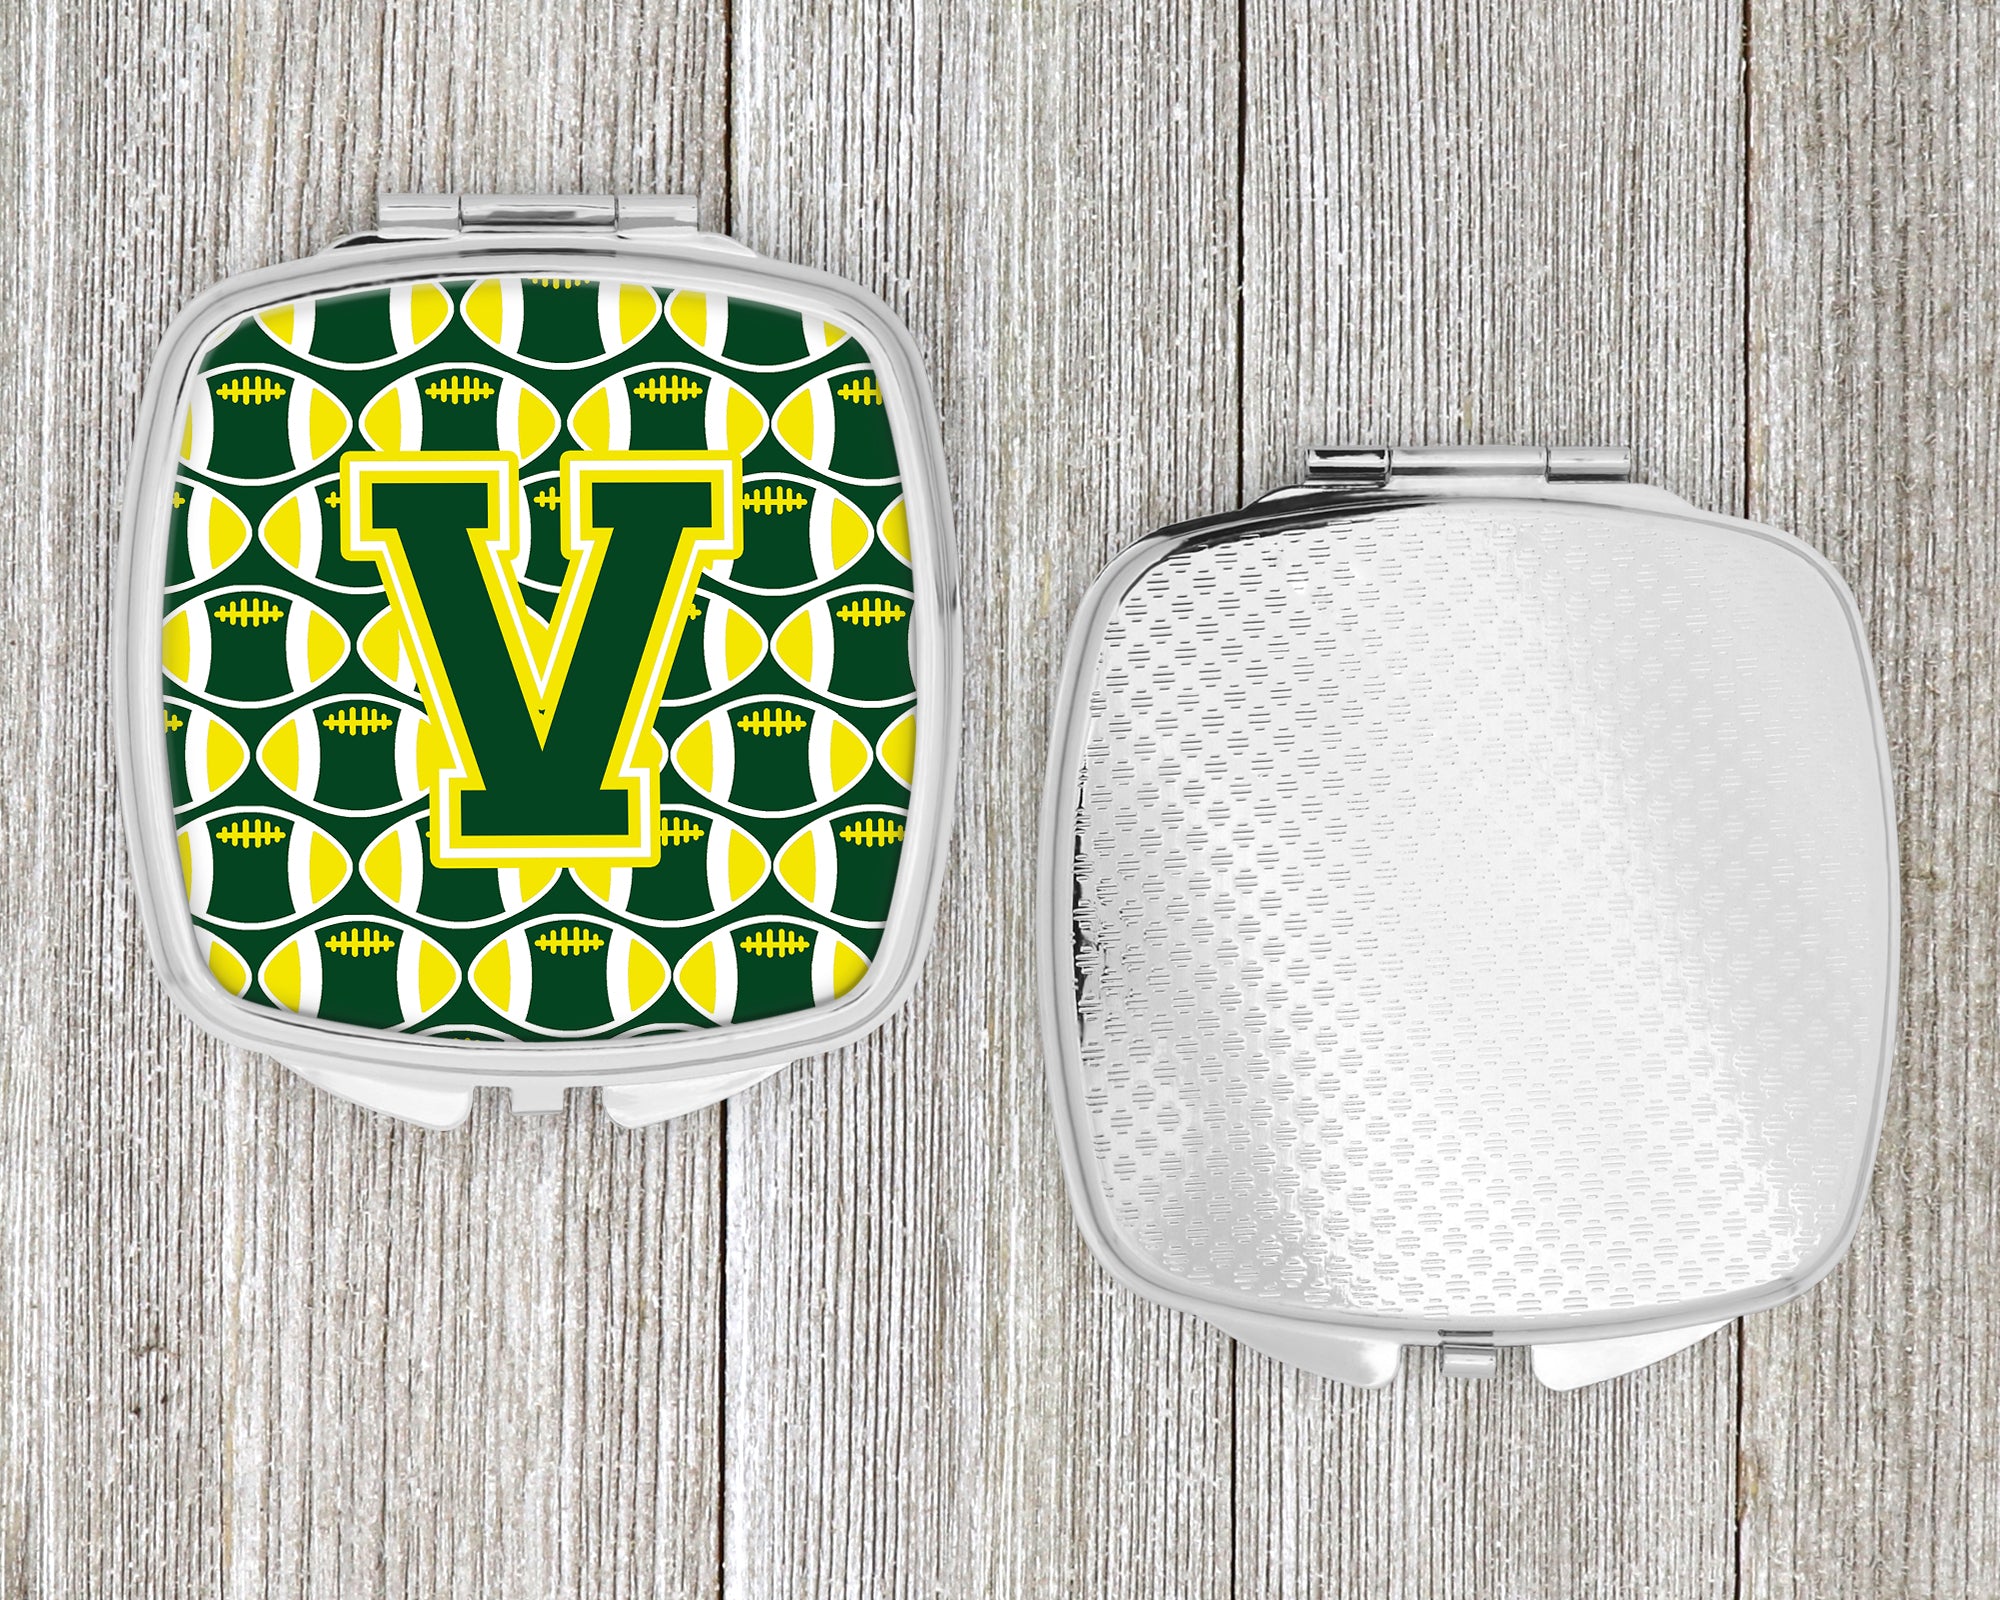 Letter V Football Green and Yellow Compact Mirror CJ1075-VSCM